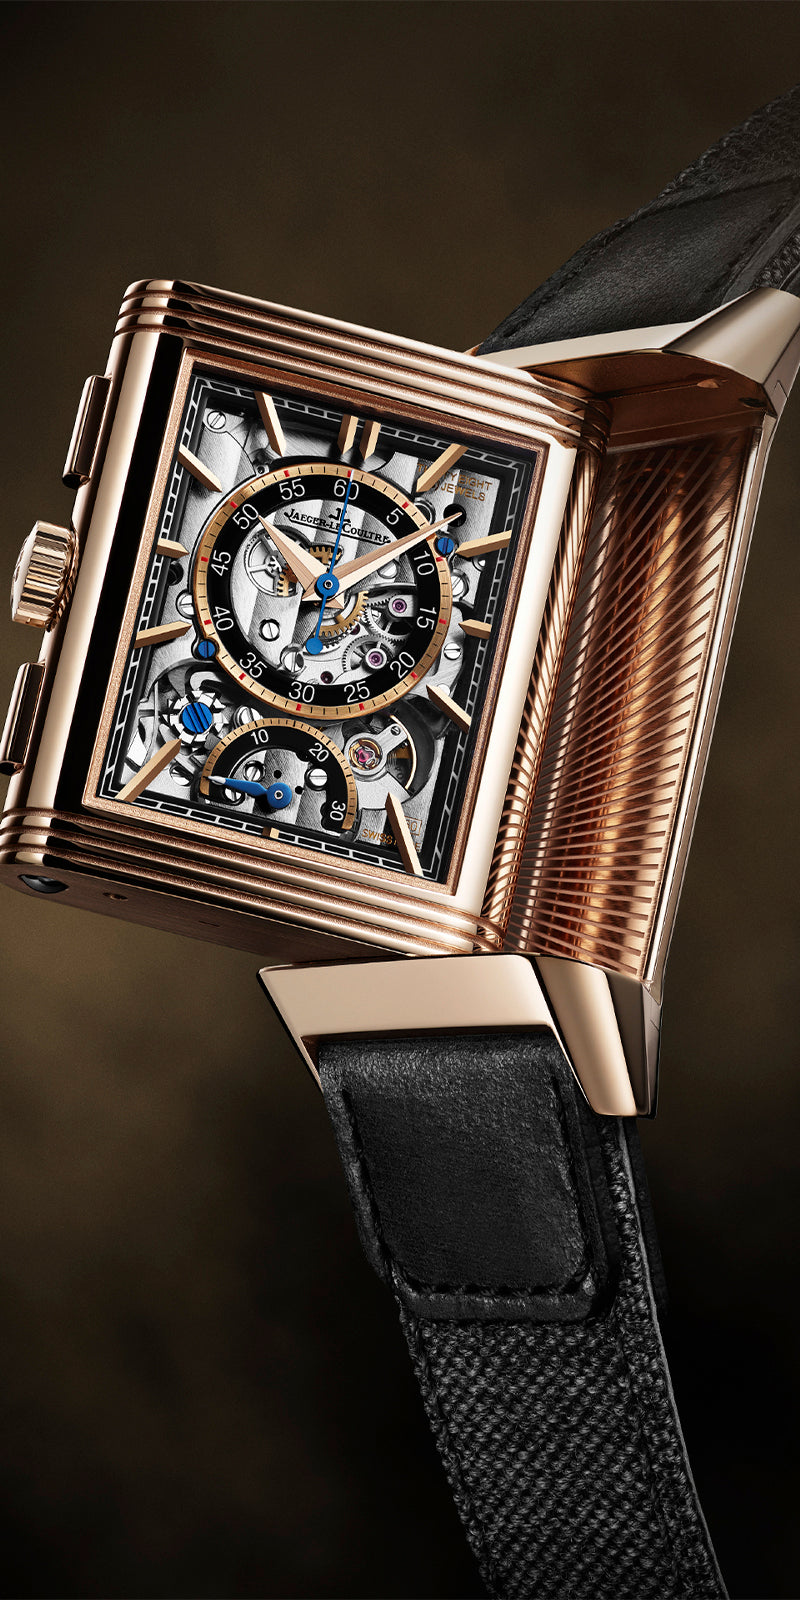 Buy Jaeger-LeCoultre Watches Online | New Jaeger-LeCoultre Authorized ...